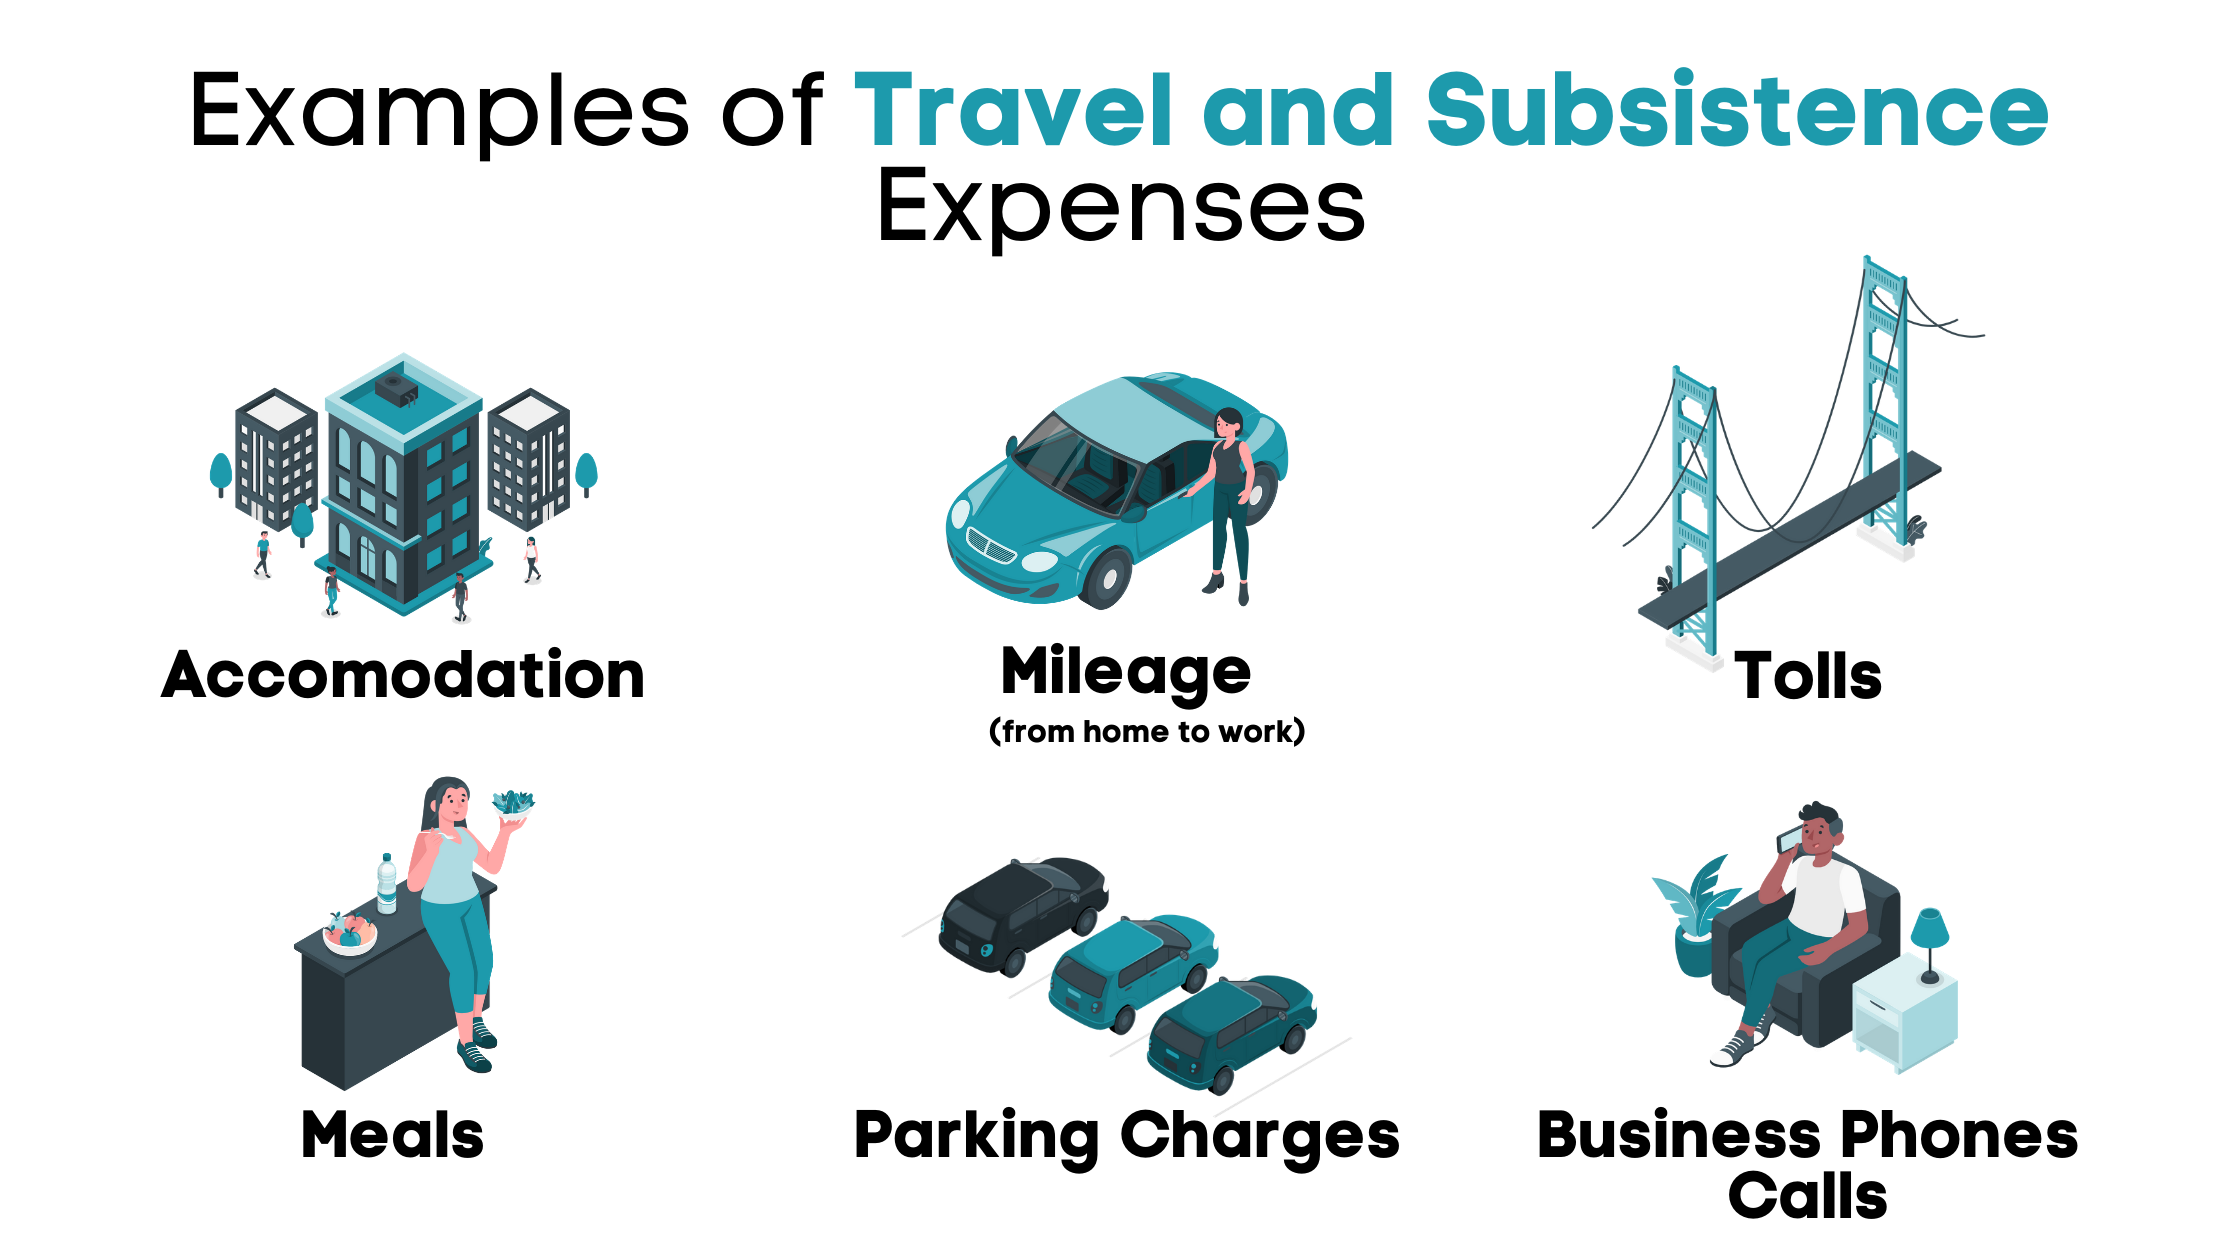 Some non-exhaustive examples of travel and subsistence expenses